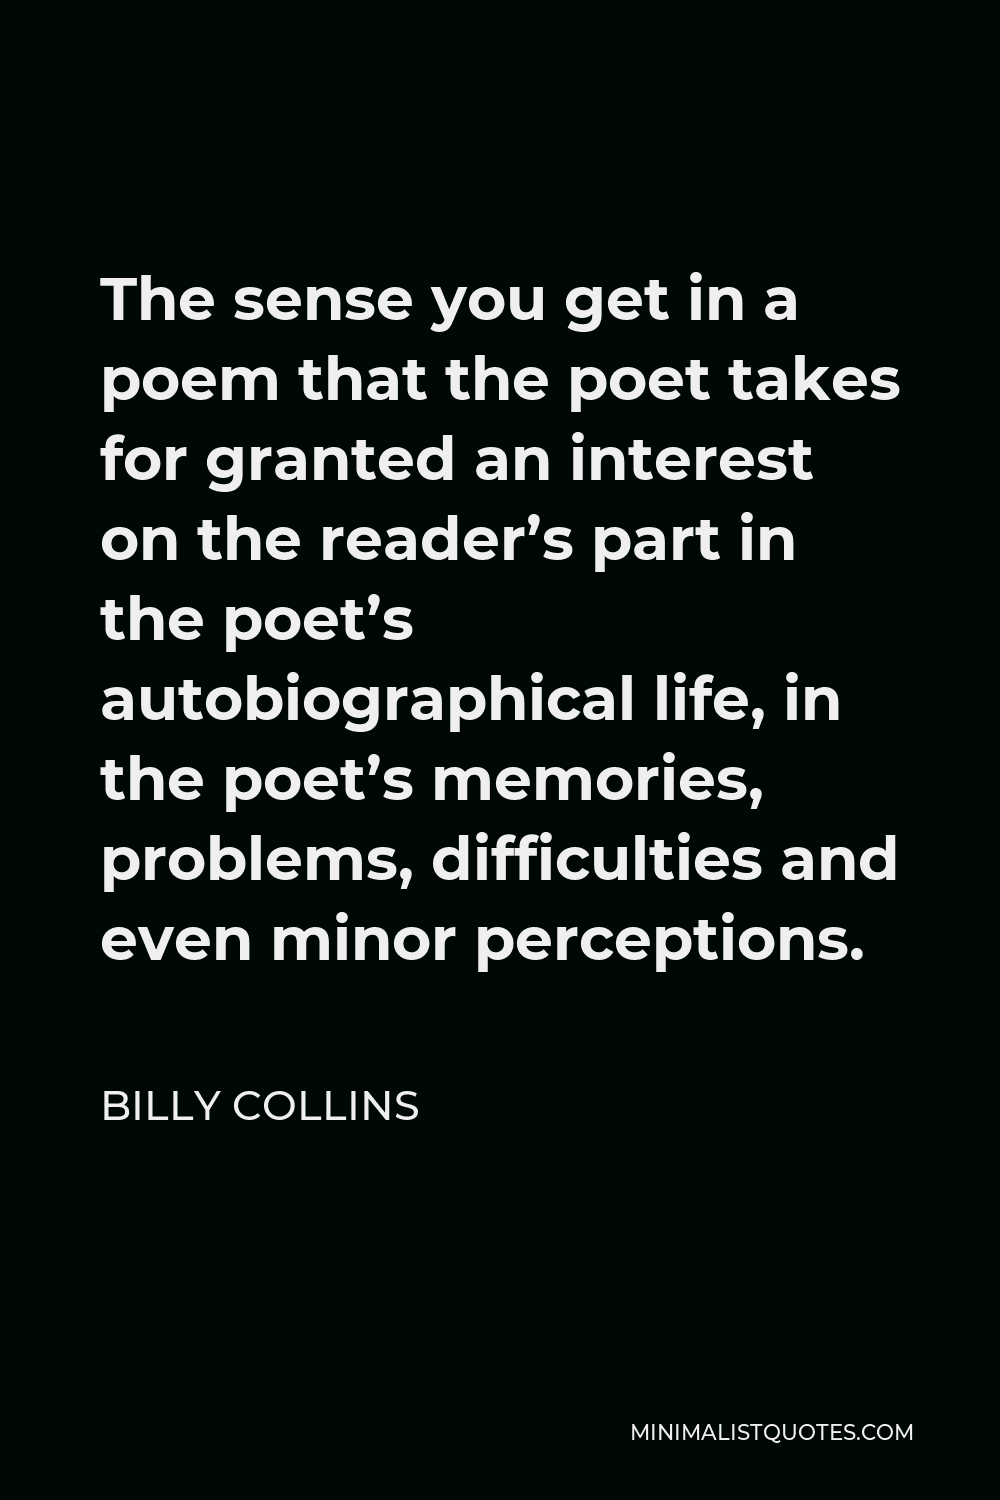 Billy Collins Quote - The sense you get in a poem that the poet takes for granted an interest on the reader’s part in the poet’s autobiographical life, in the poet’s memories, problems, difficulties and even minor perceptions.